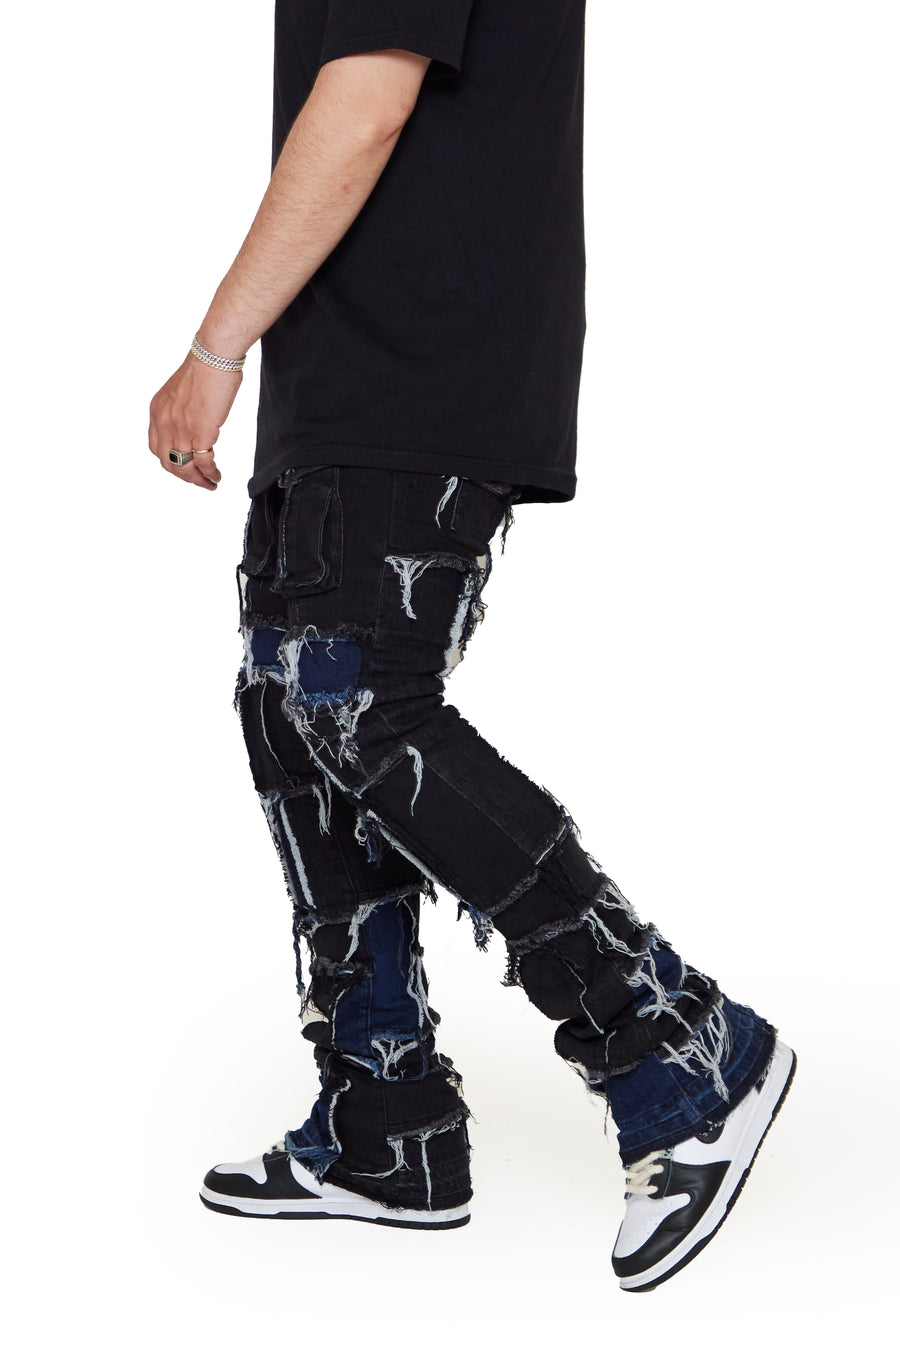 “CLUB83” BLACK STACKED FLARE JEAN